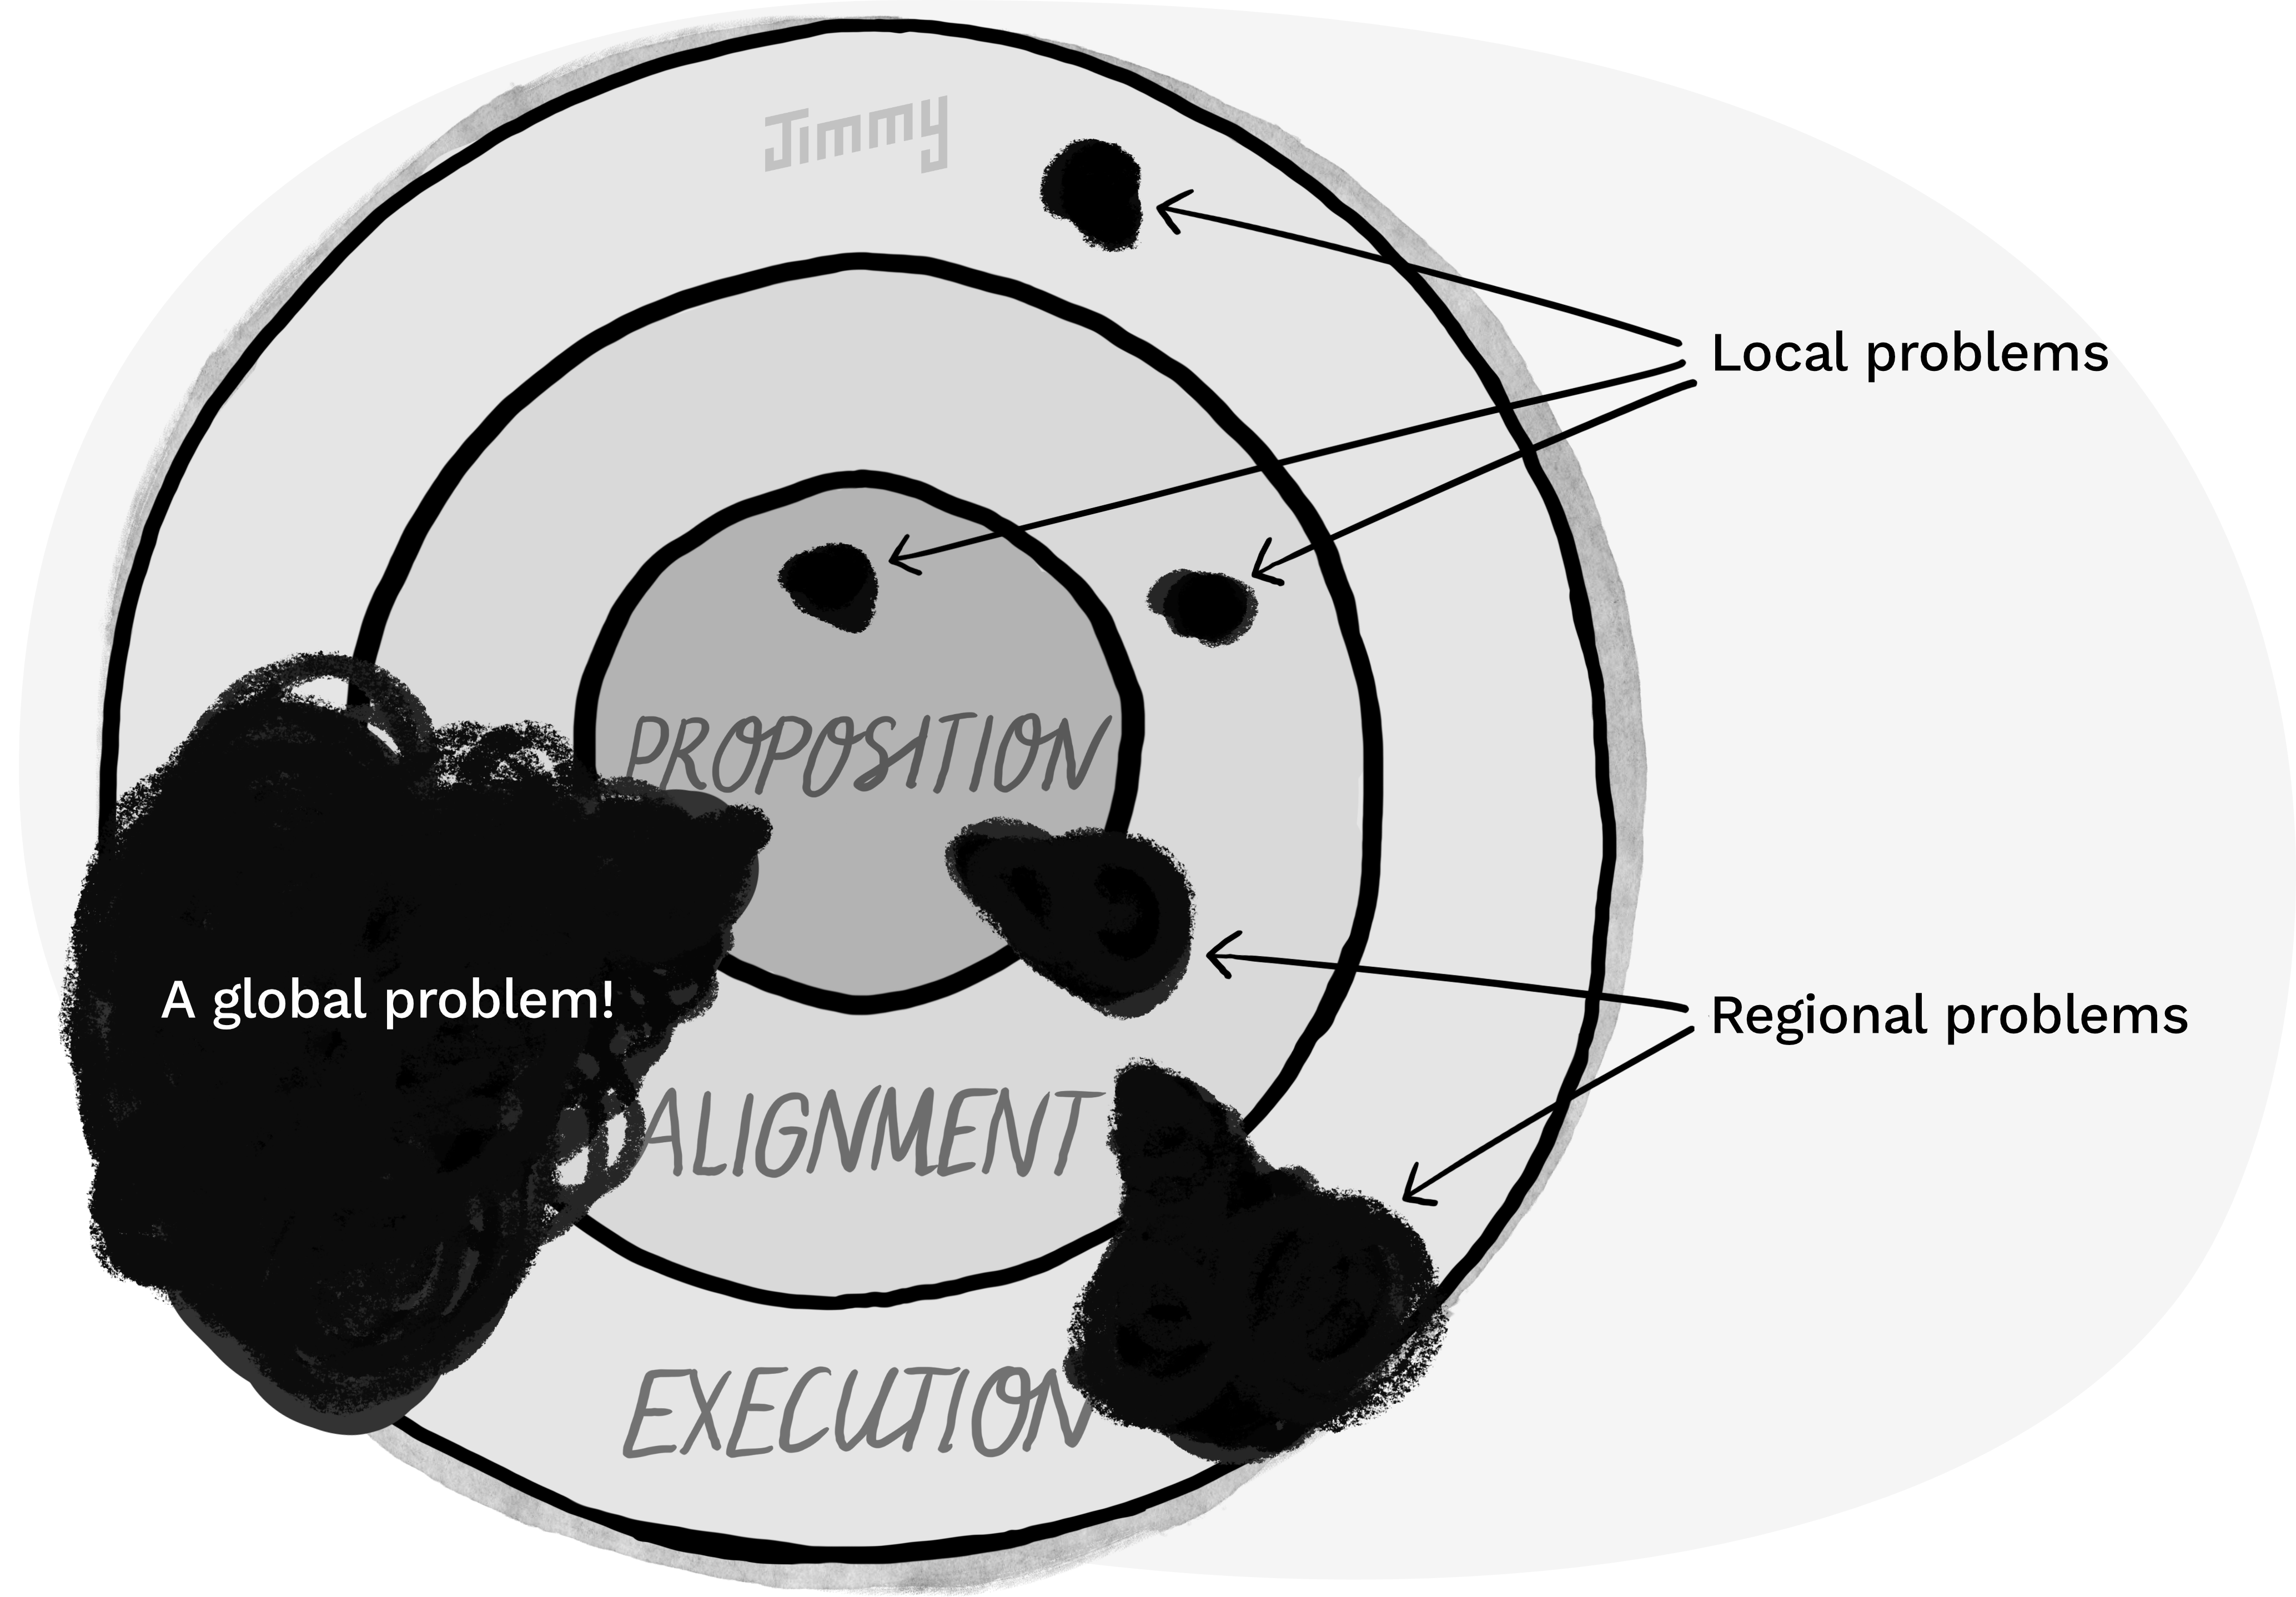 
The project model (from earlier) with black stains on it. Stains that are within a single
stage are labelled 'Local Problems'. Stains that cross across two stages are labelled 'Regional
Problems'. And there's one stain that impacts all three stages and this is labelled 'A Global
Problem'.
